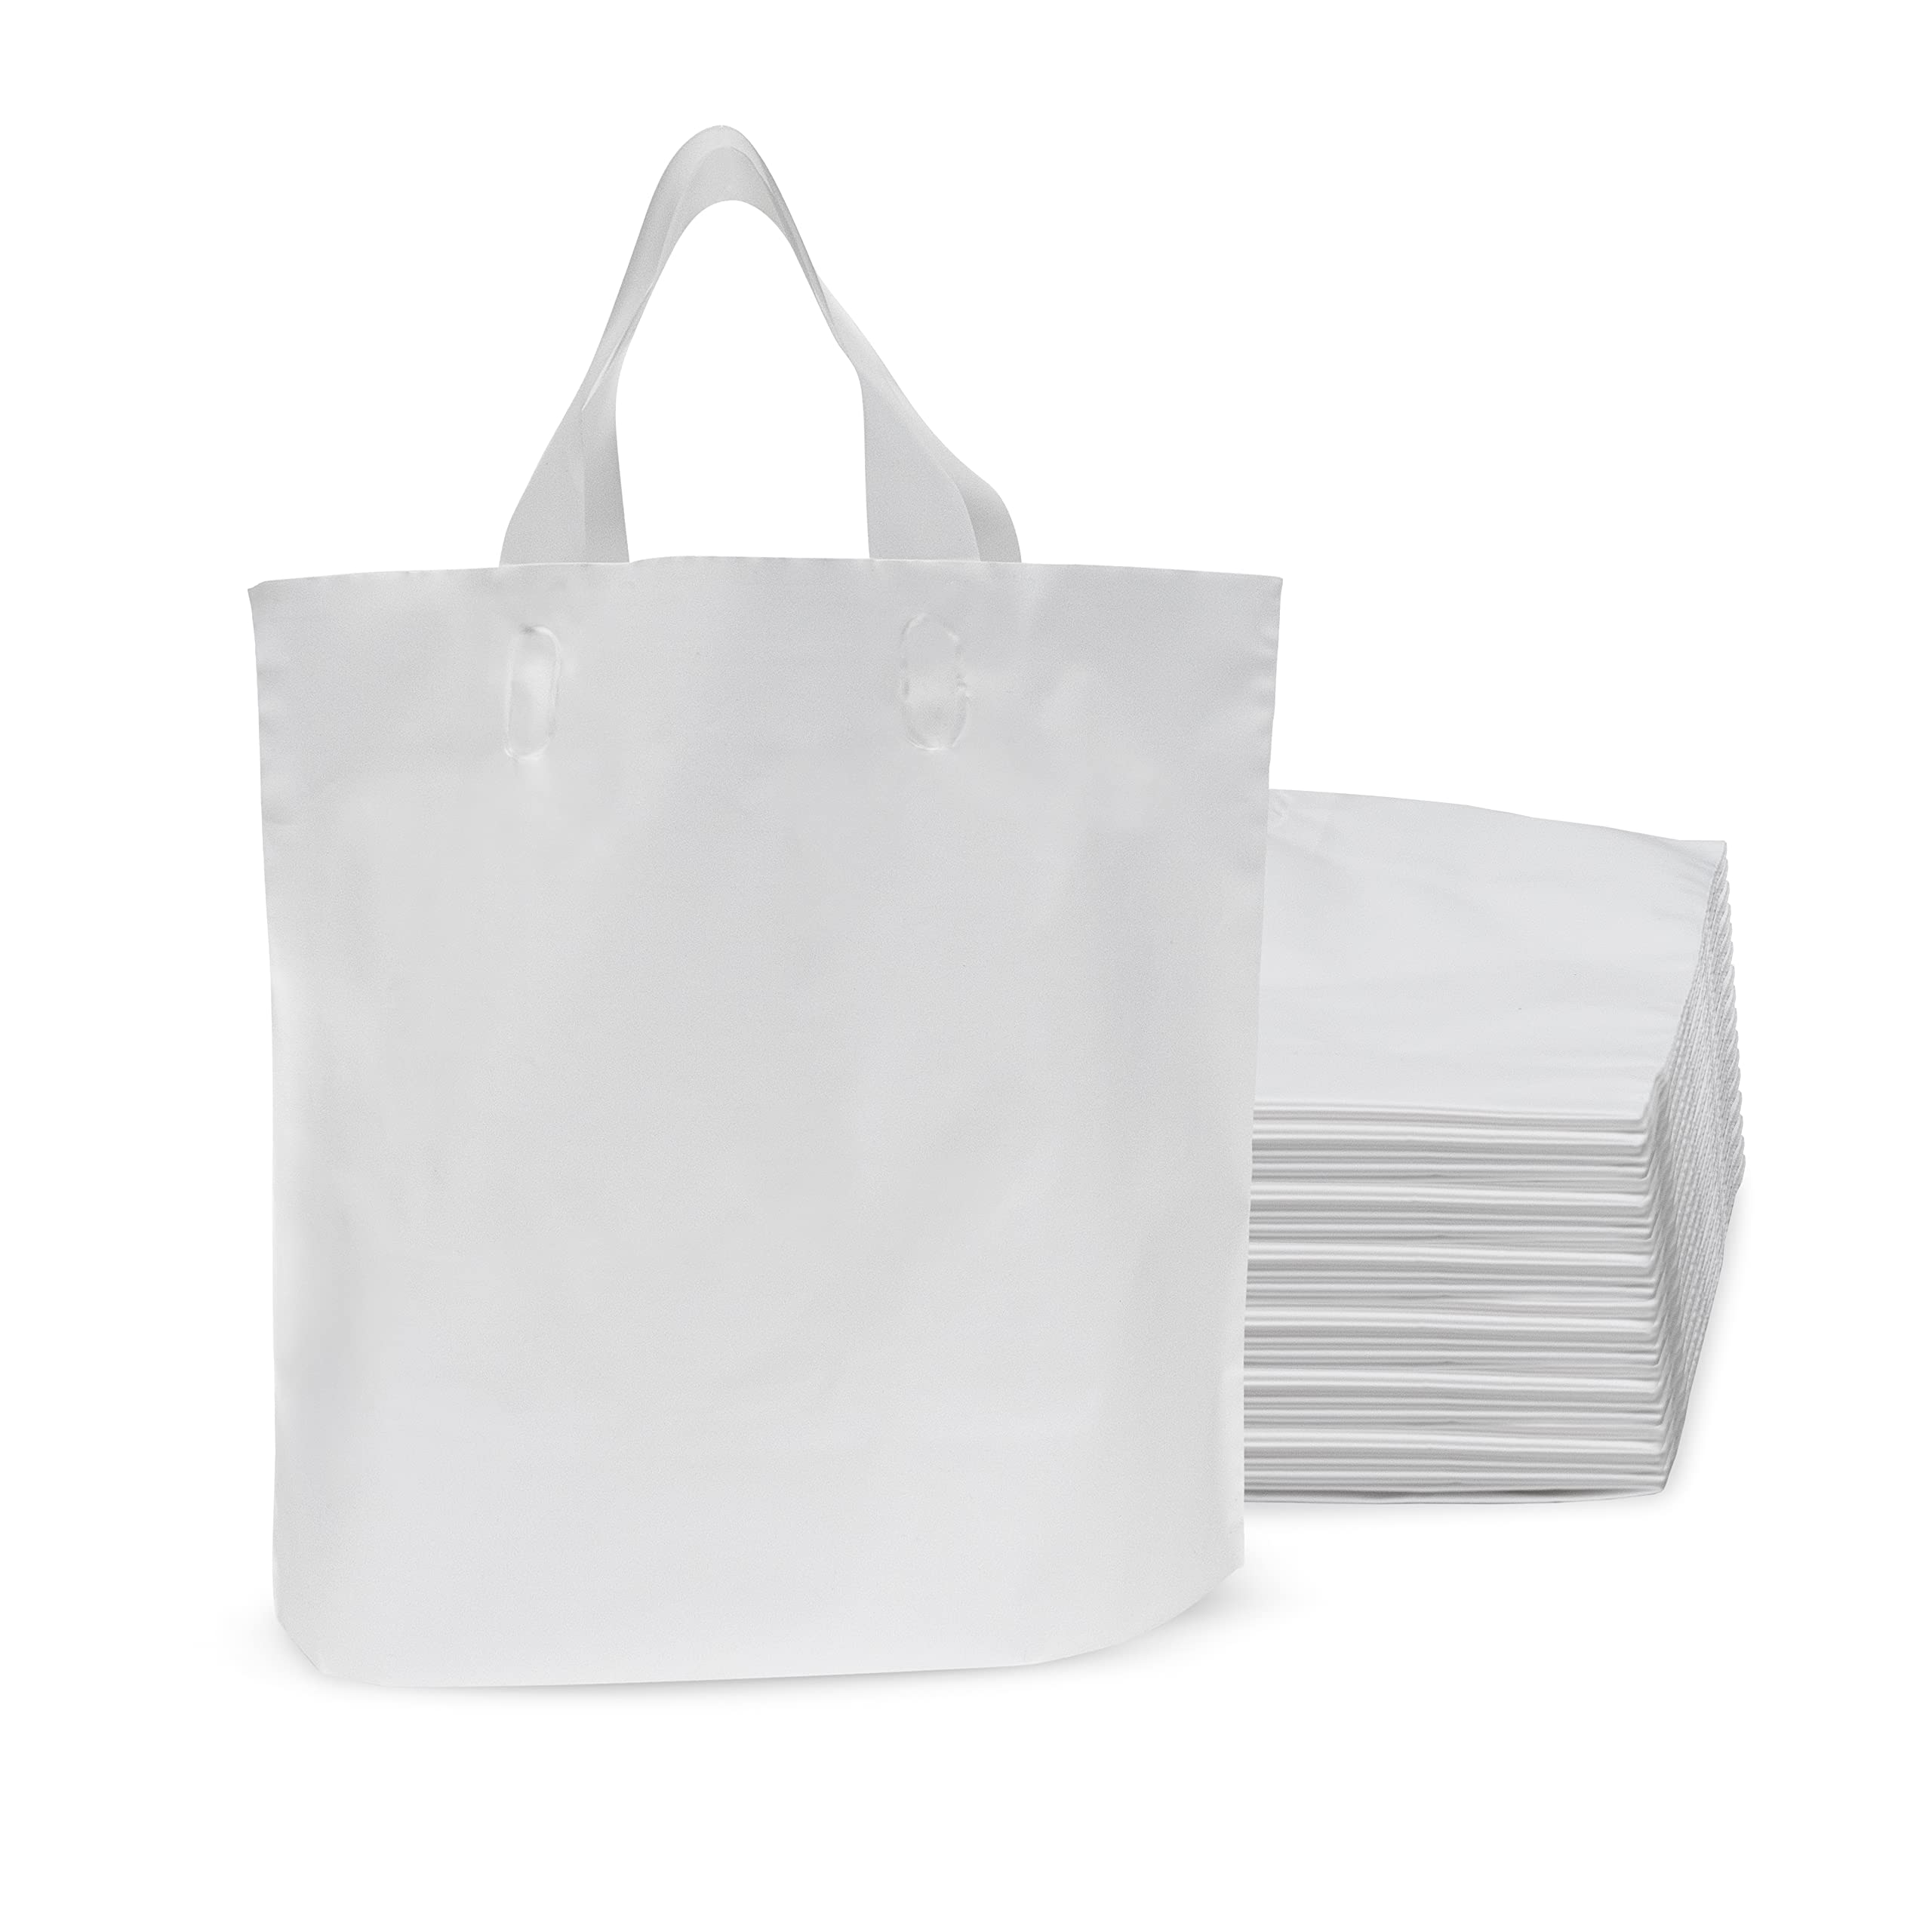 Plastic Bags with Handles - 50 Pack White Shopping Bags for Boutique, Large Opaque Plastic Tote Bags in Bulk for Small Business, Retail Stores, Parties, Events, Take Out, Thank You, Gifts - 12x4x10  - Acceptable